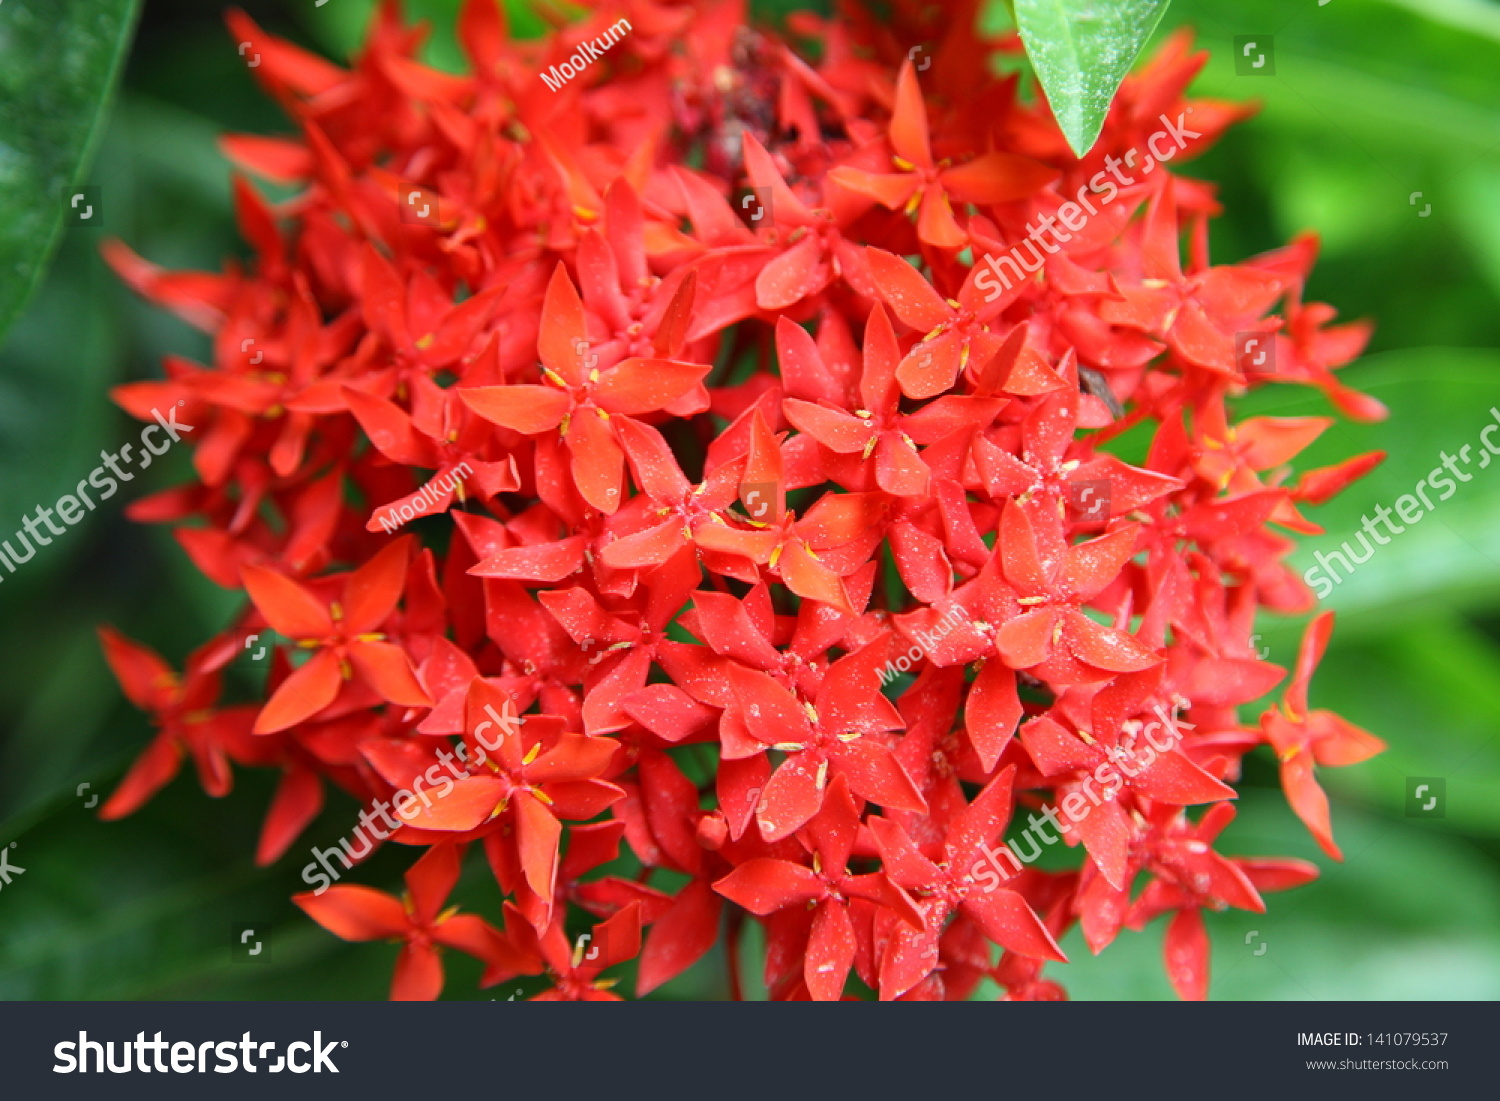 Awesome Red Flower Images with Names | Top Collection of different ...